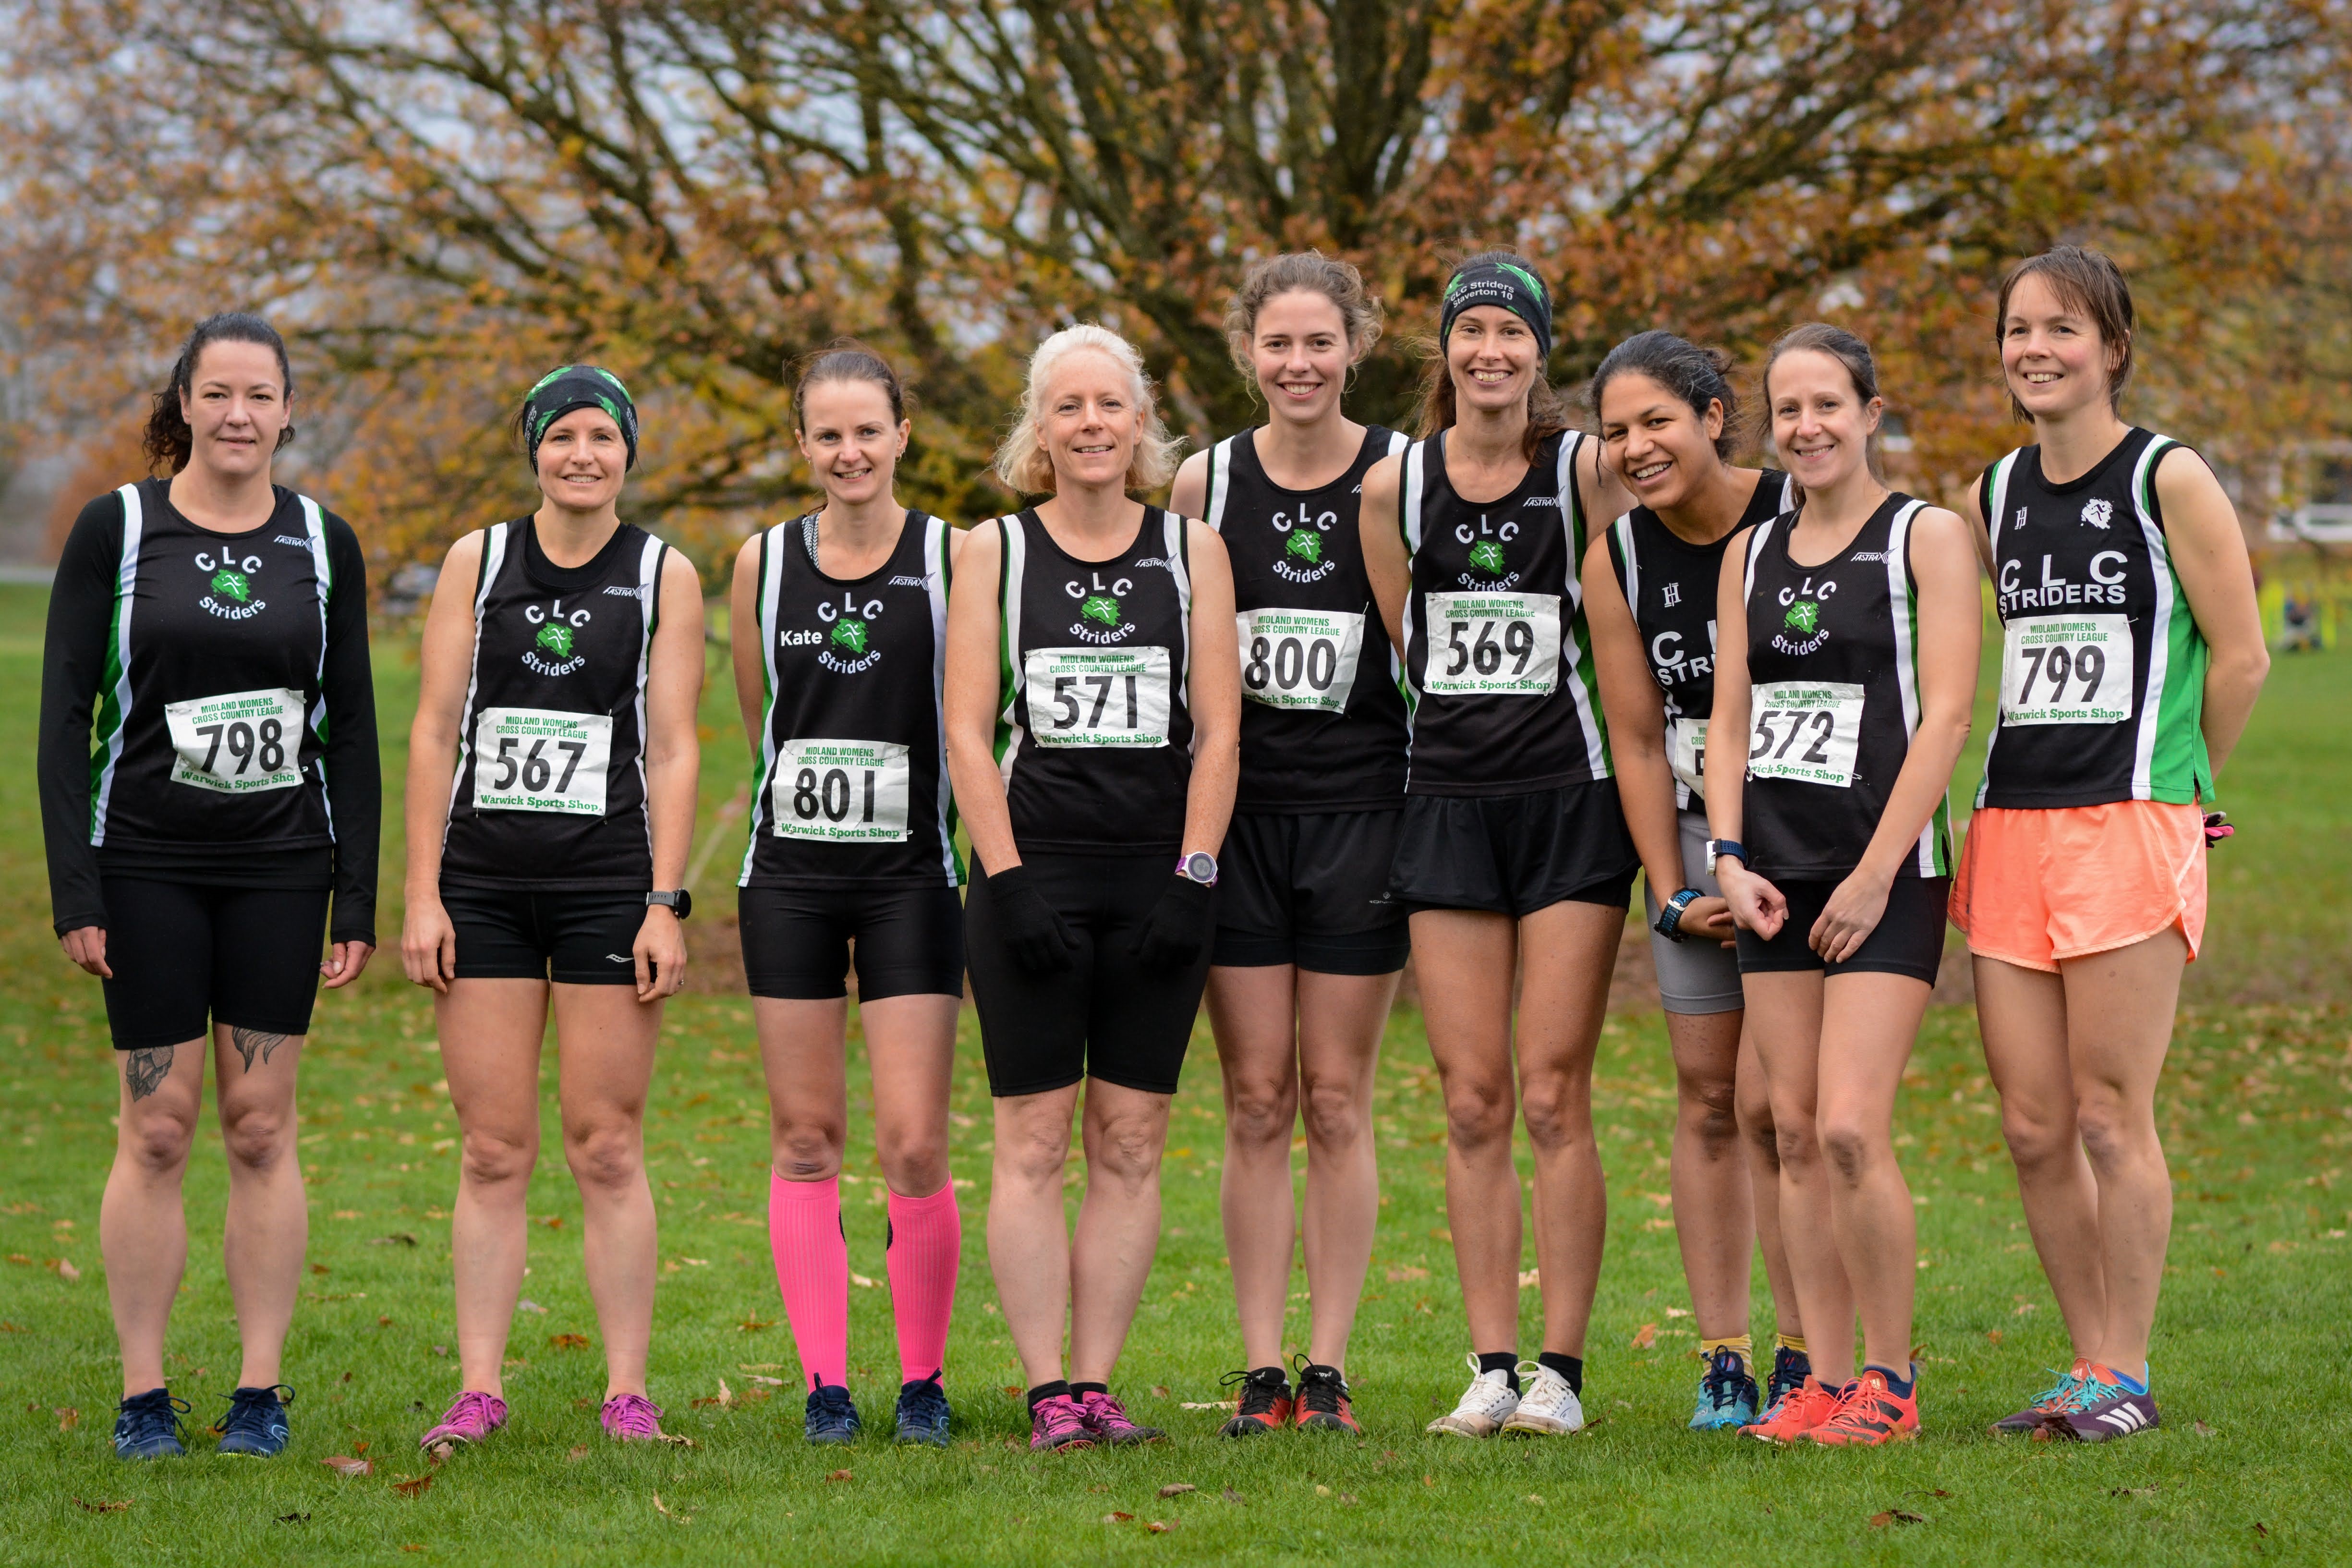 Ladies Midlands Cross Country League division 2 team